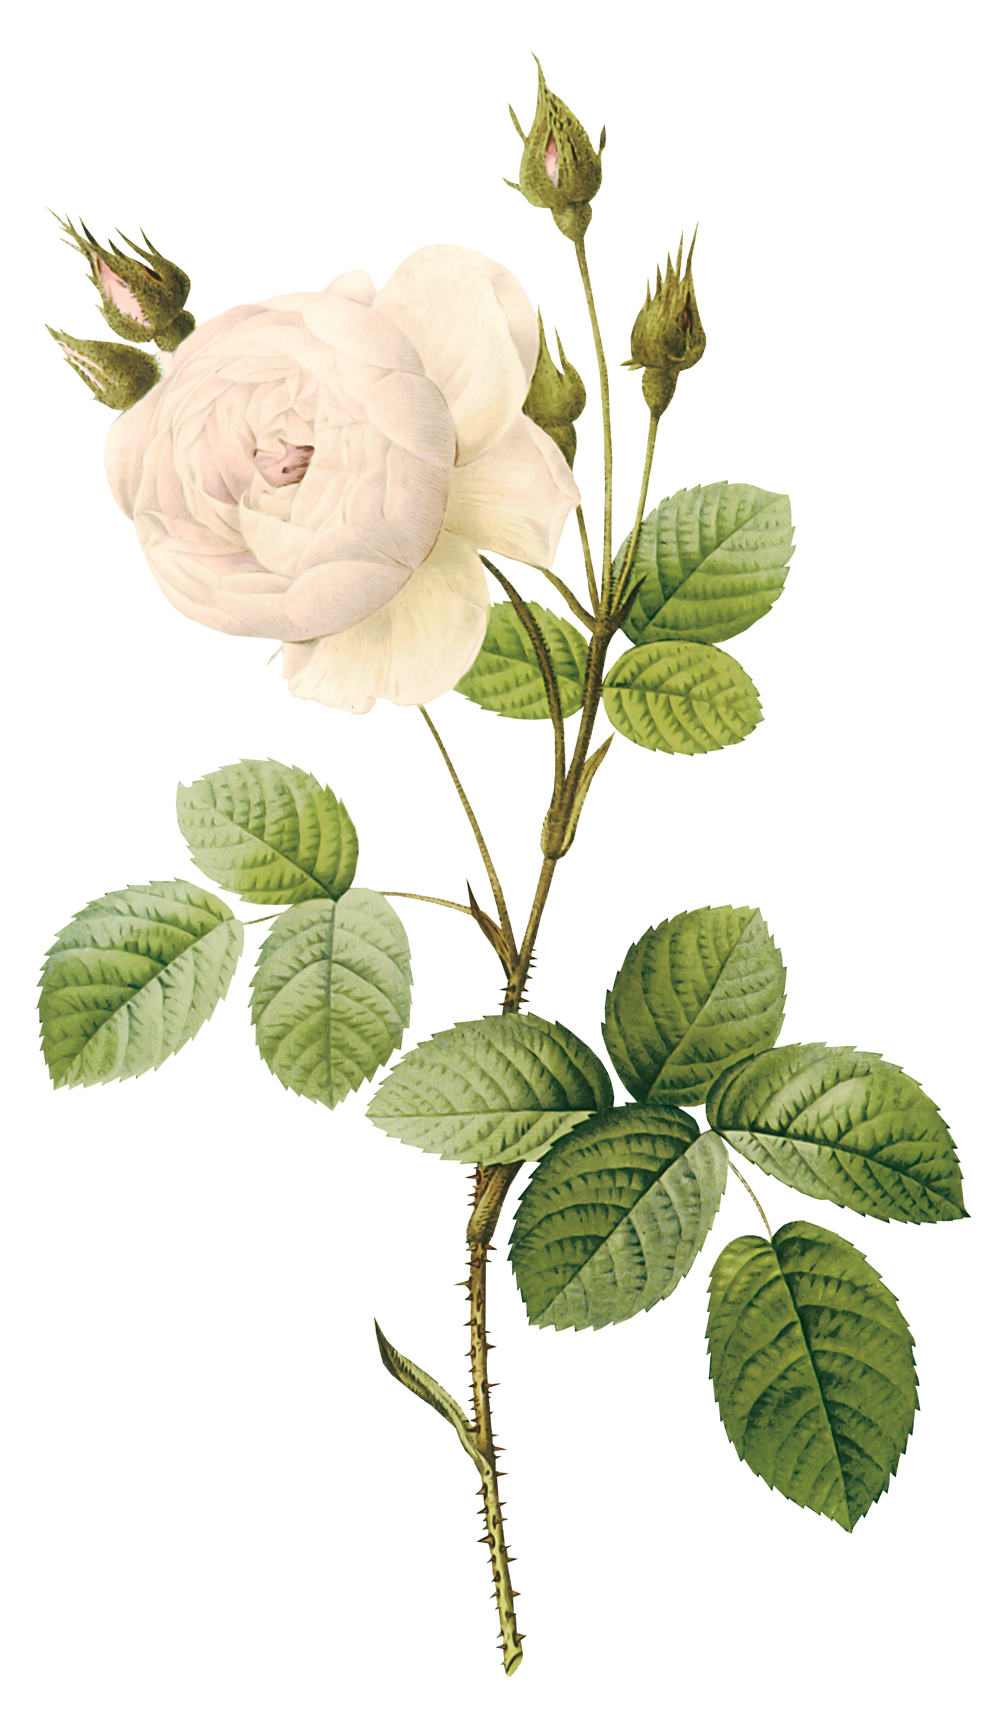 White roses PNG images Download